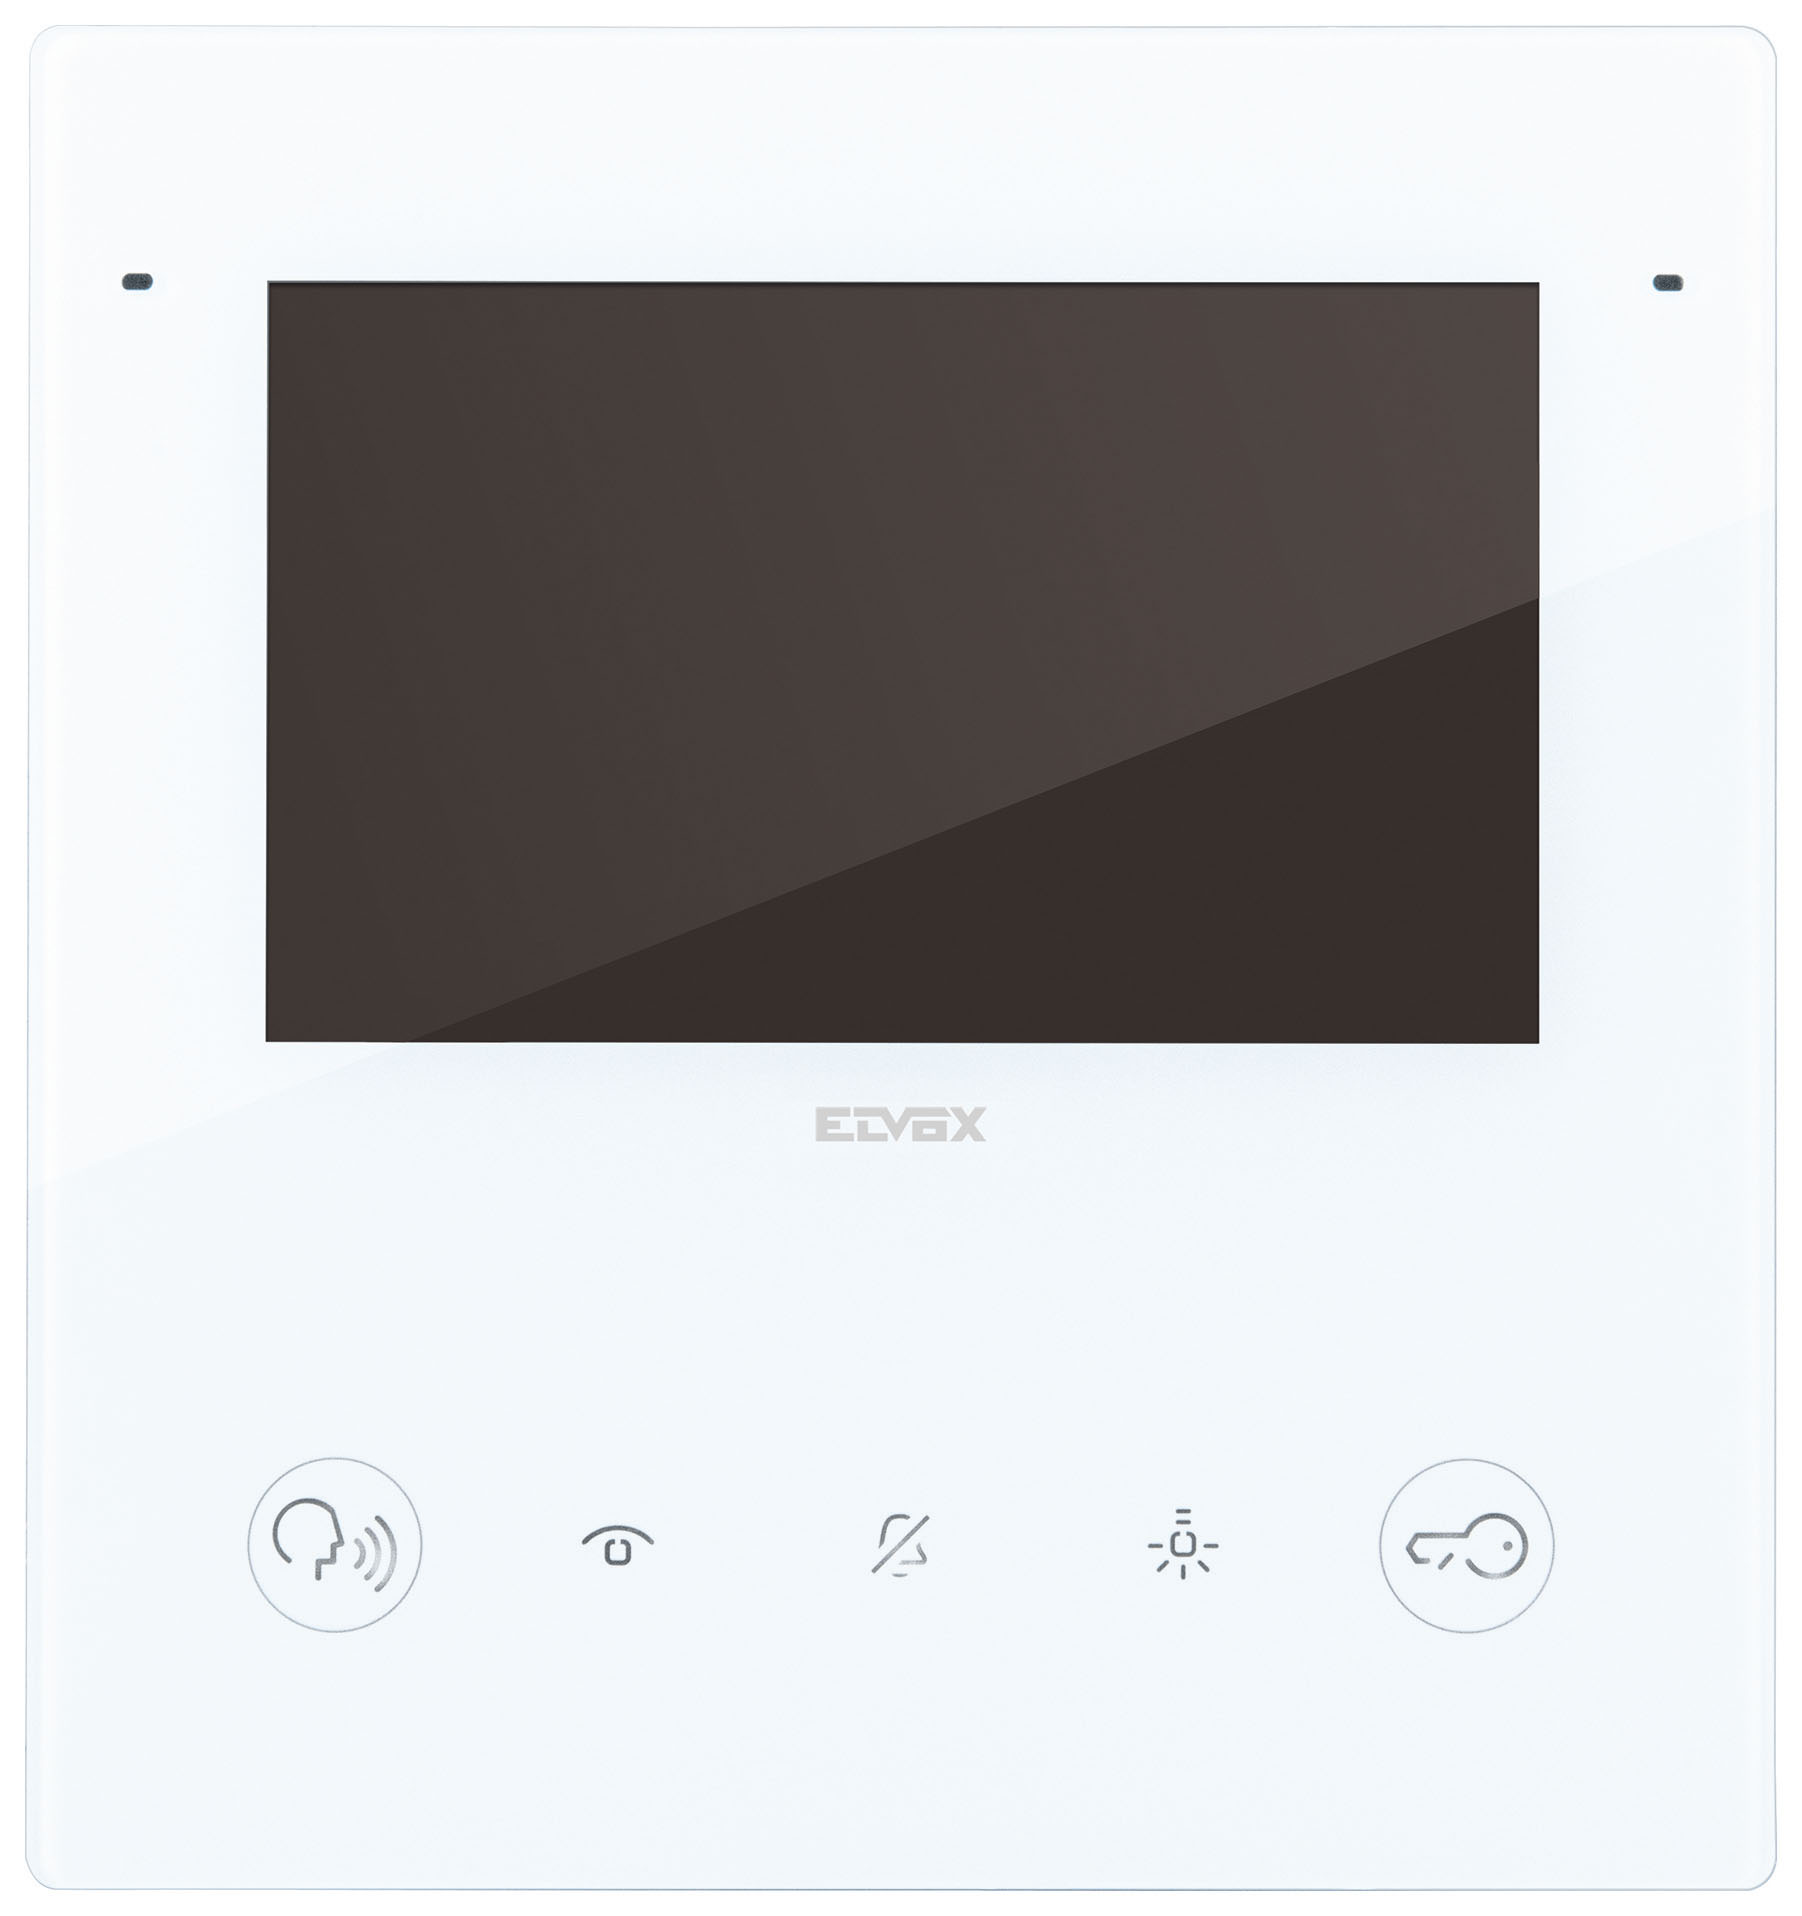 ELVOX TAB 5S UP DUE FILI+ 2-WIRE INTERCOM MONITOR WITH WIFI WHITE APARTMENT/RESIDENTIAL 5 INCH DISPLAY CAPACITIVE TOUCHSCREEN PLASTIC 28VDC/ POWER BY BUS CONTROLLER